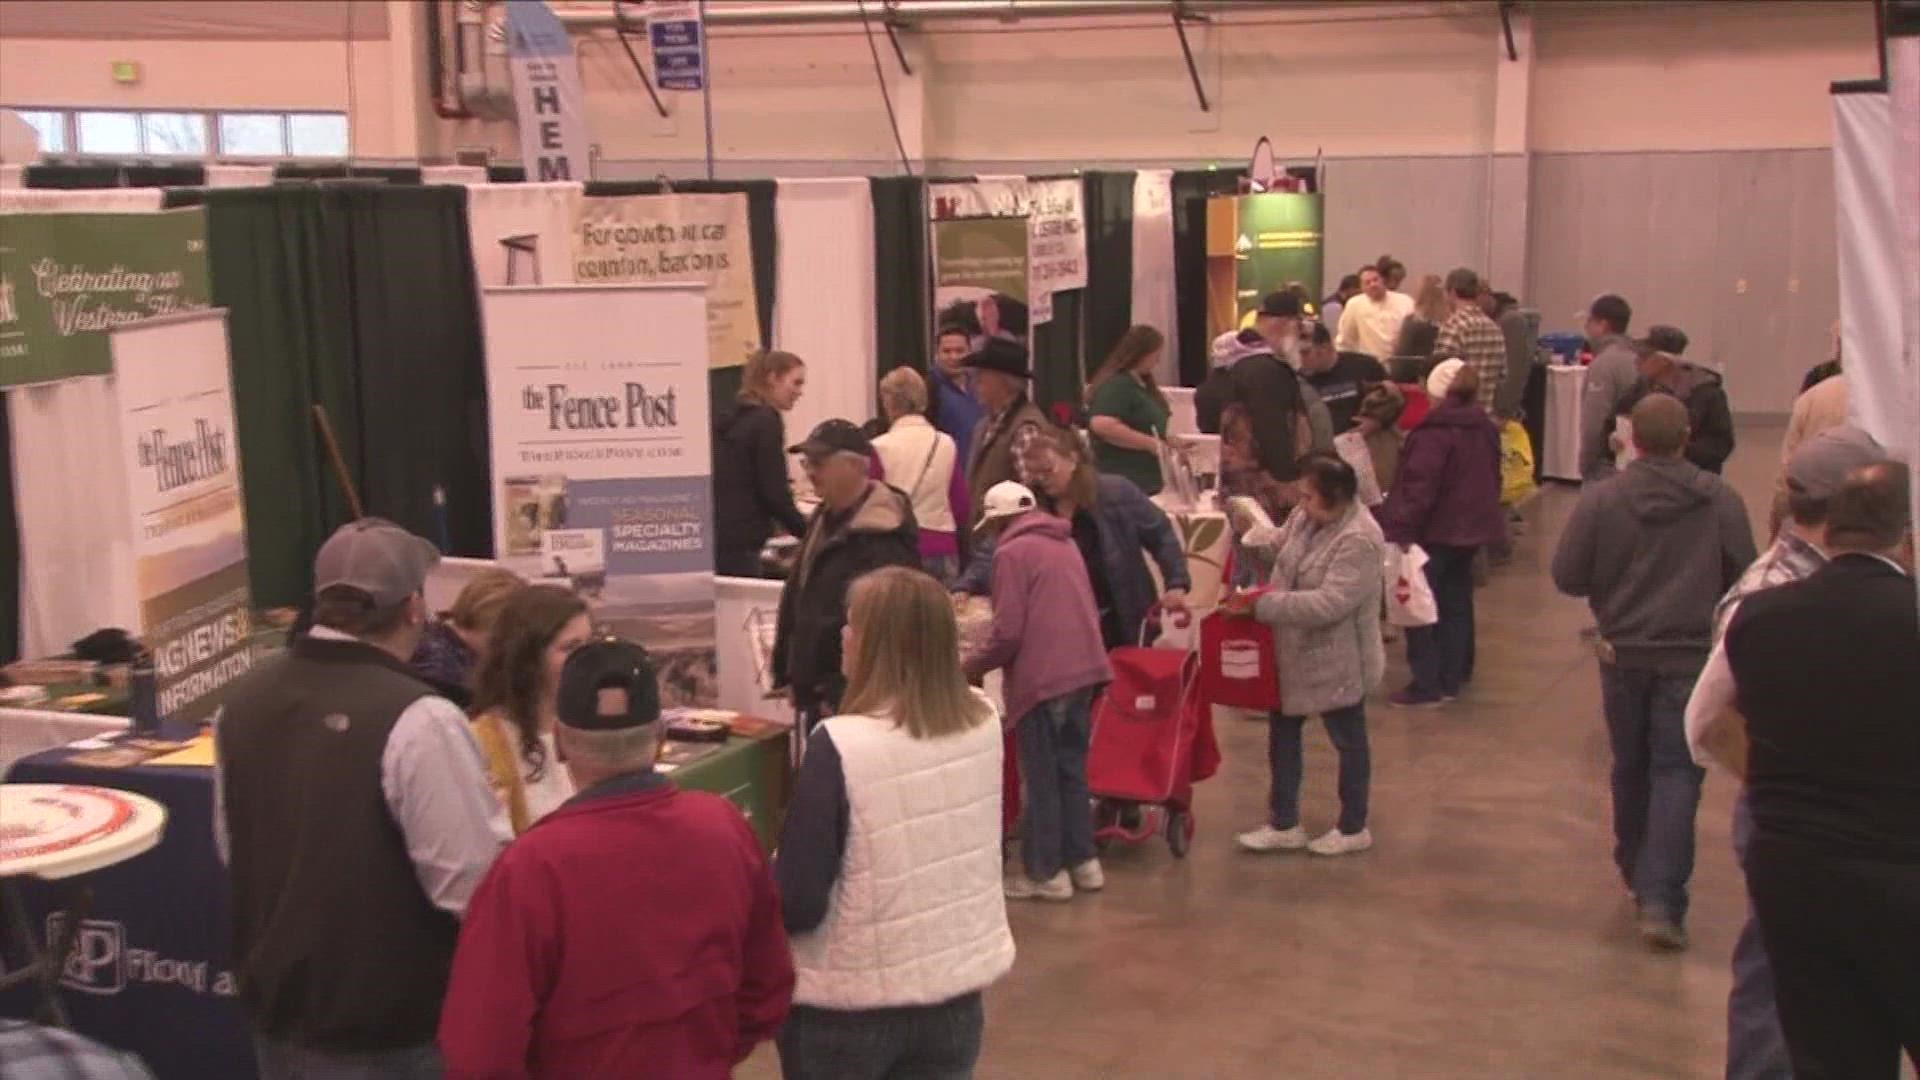 The 58th annual Colorado Farm Show is a three-day event held at Island Grove Park in Greeley during the last week of January.